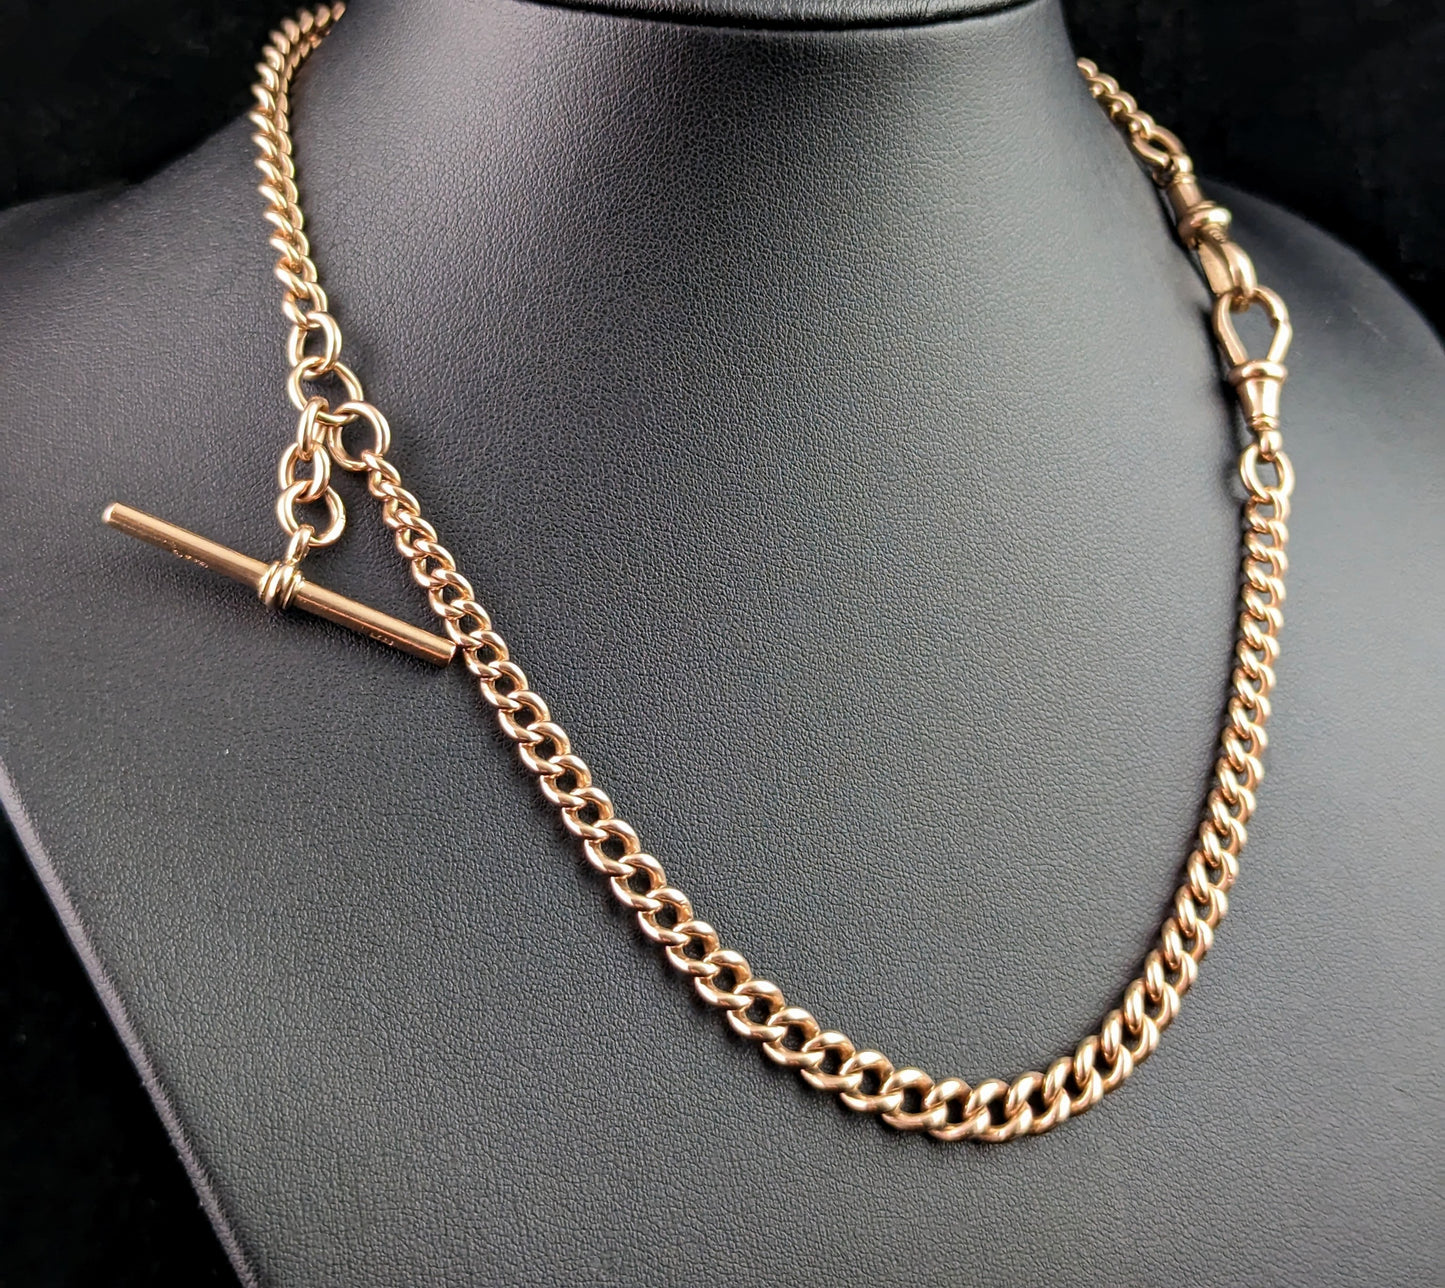 Antique 9ct Rose gold Albert chain, Edwardian, curb link necklace